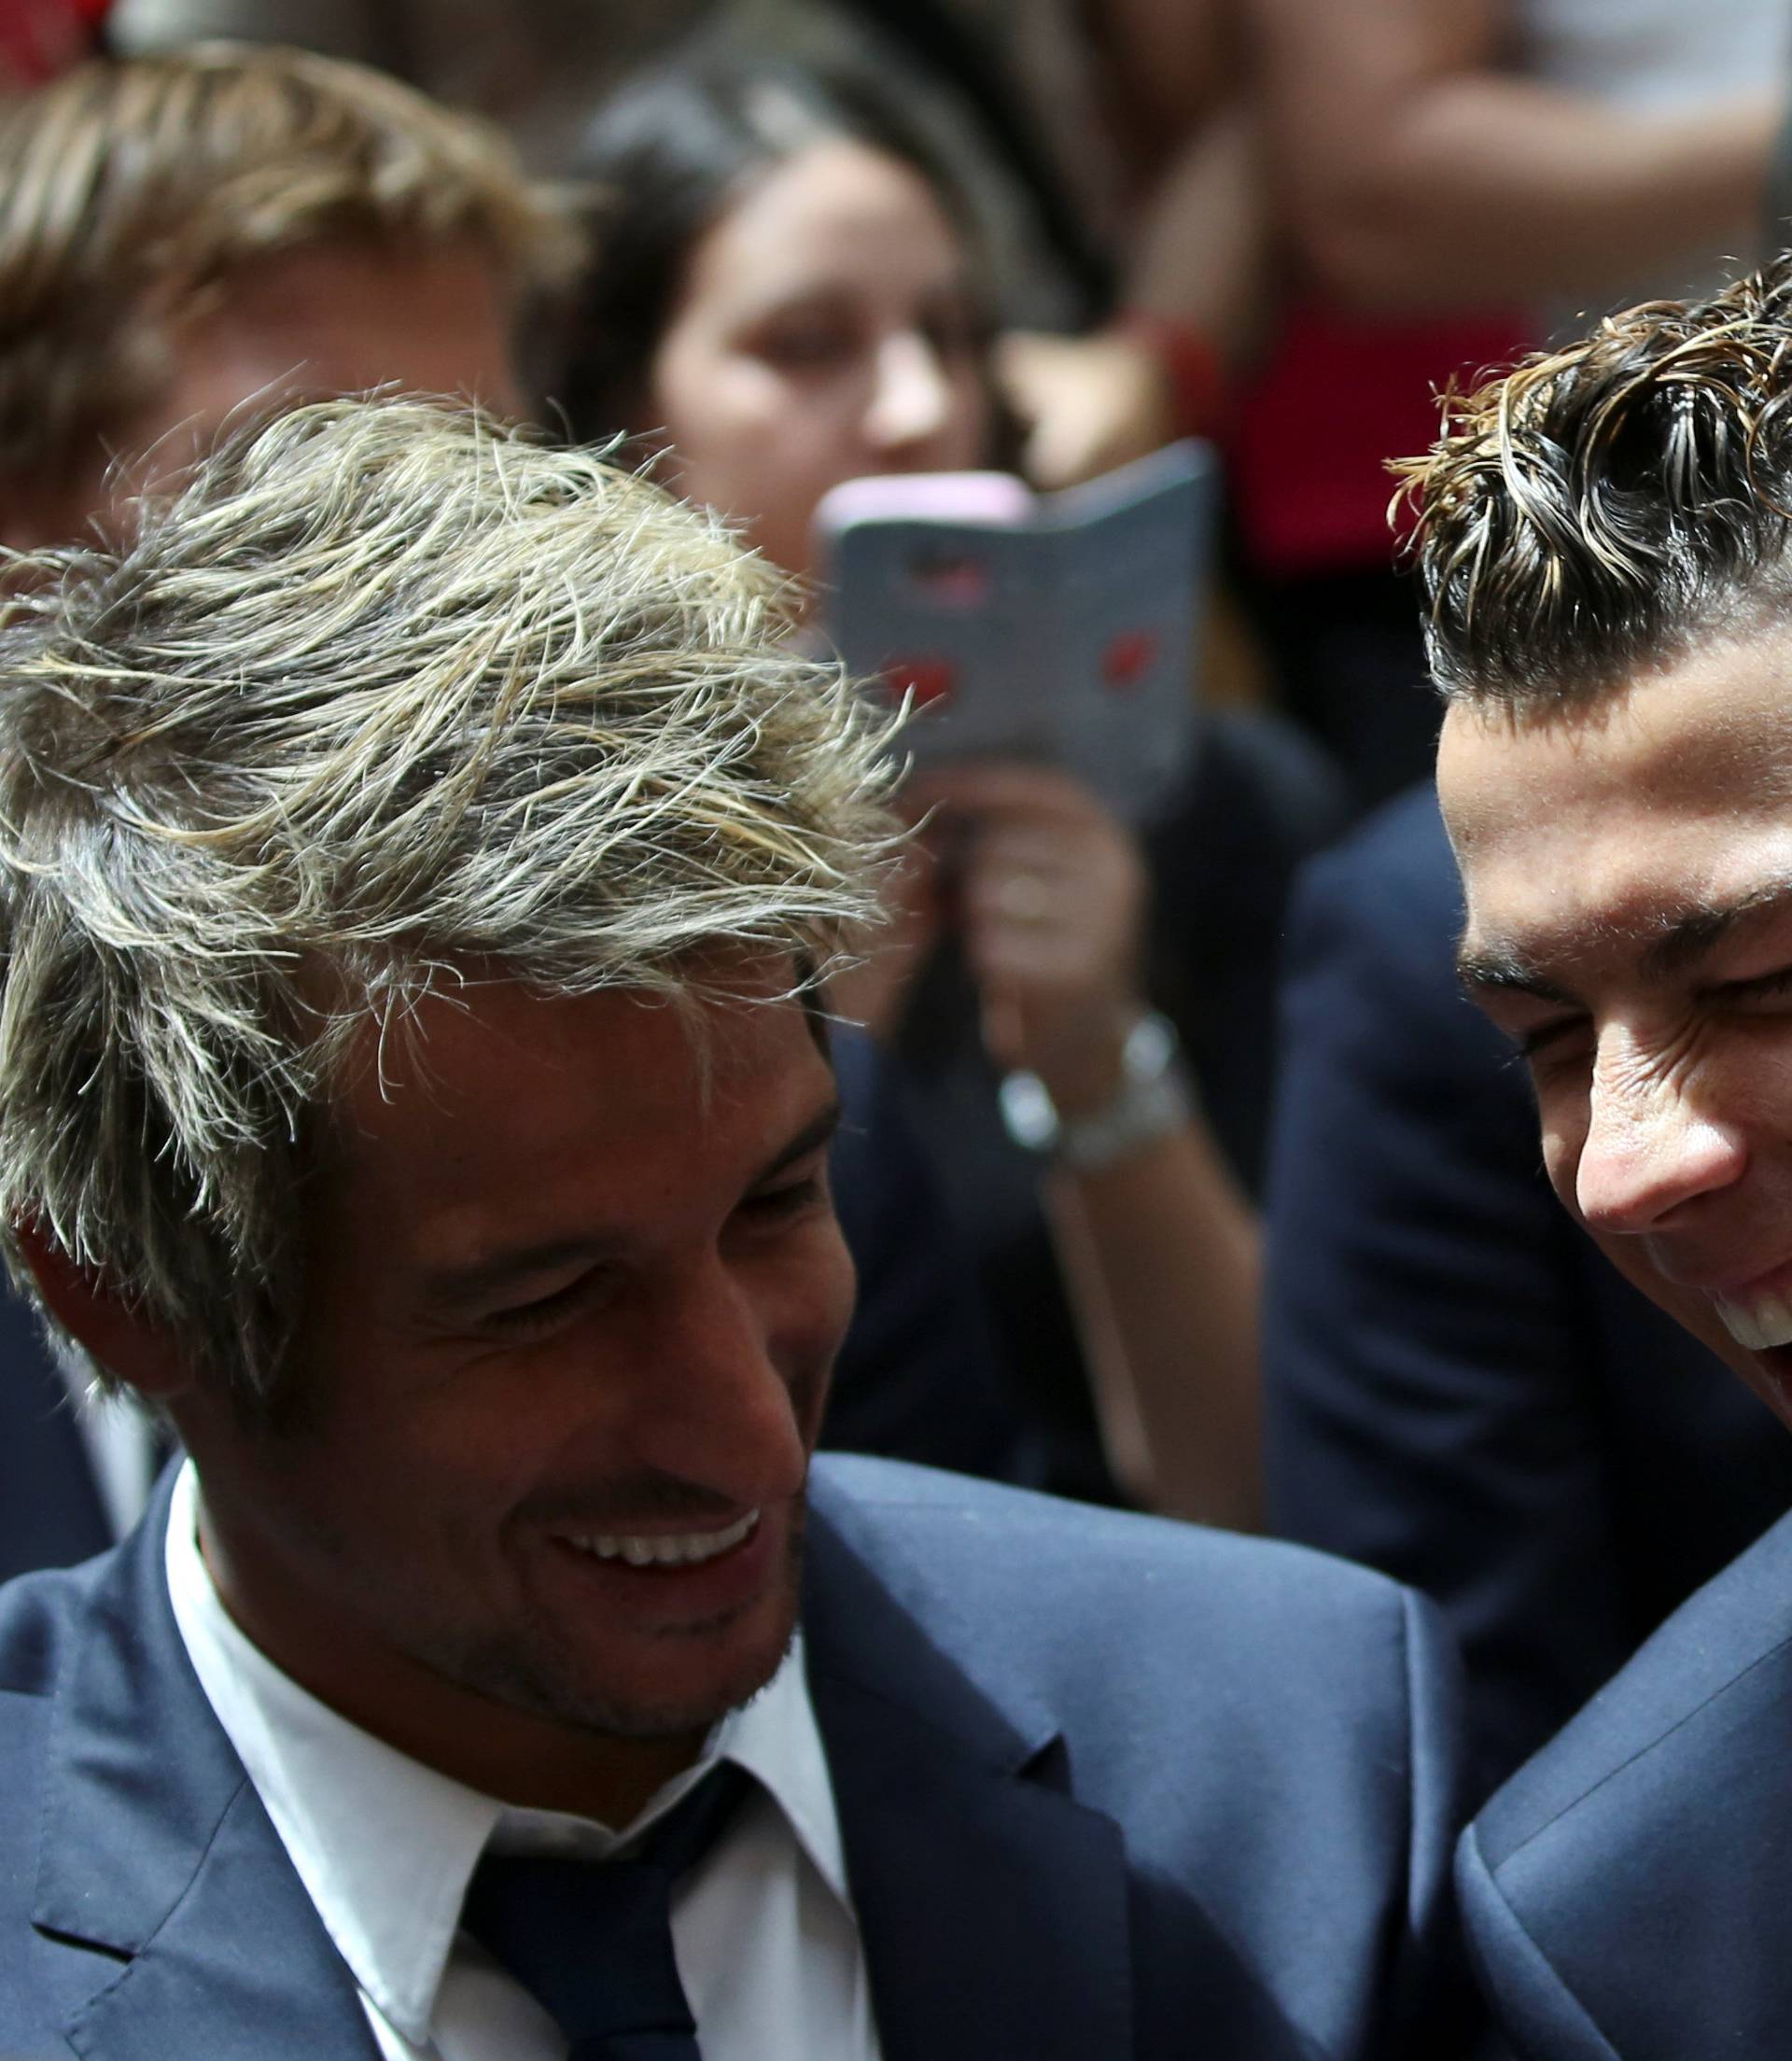 Real Madrid's Cristiano Ronaldo and teammate Coentrao attend a ceremony after winning La Liga title at the headquarters of Madrid's regional government in Madrid